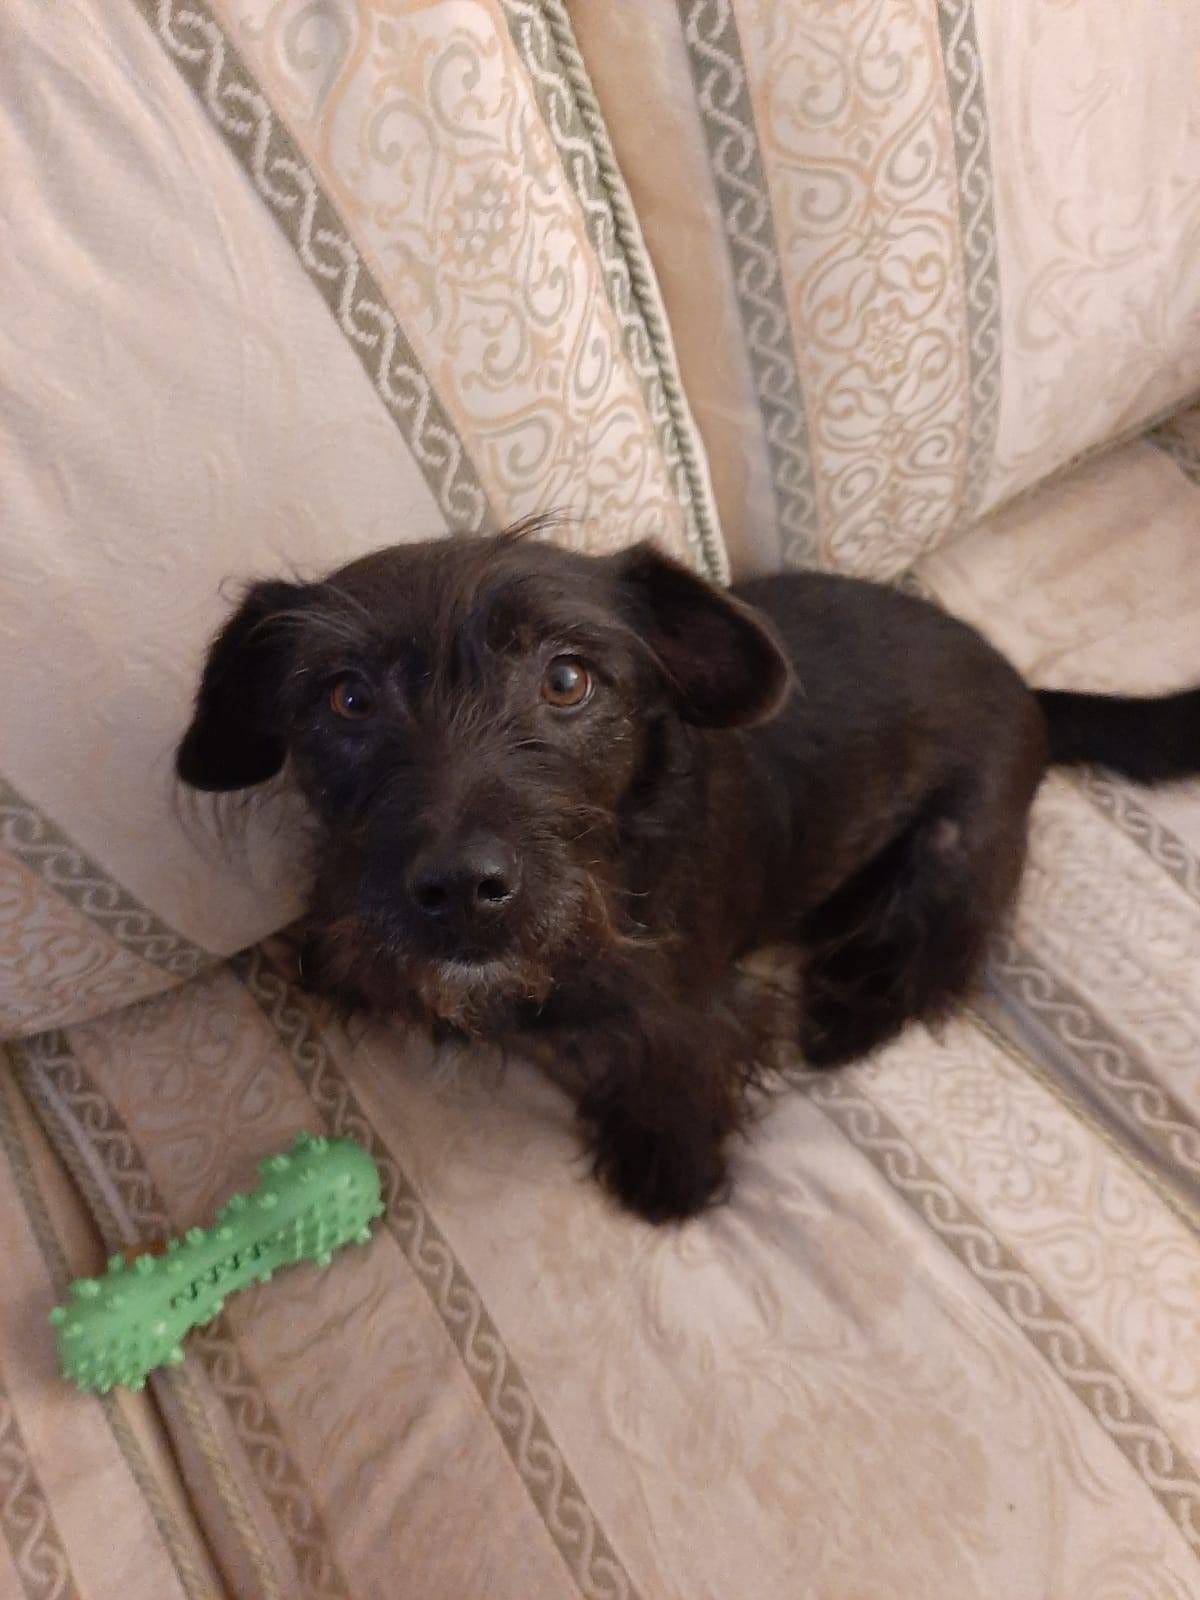 Winnie, a black small-sized dog with a vaguely Schnauzer vibe, looks at the camera with cute eyes. She is sitting on a sofa, with a green chewing toy in front of her.